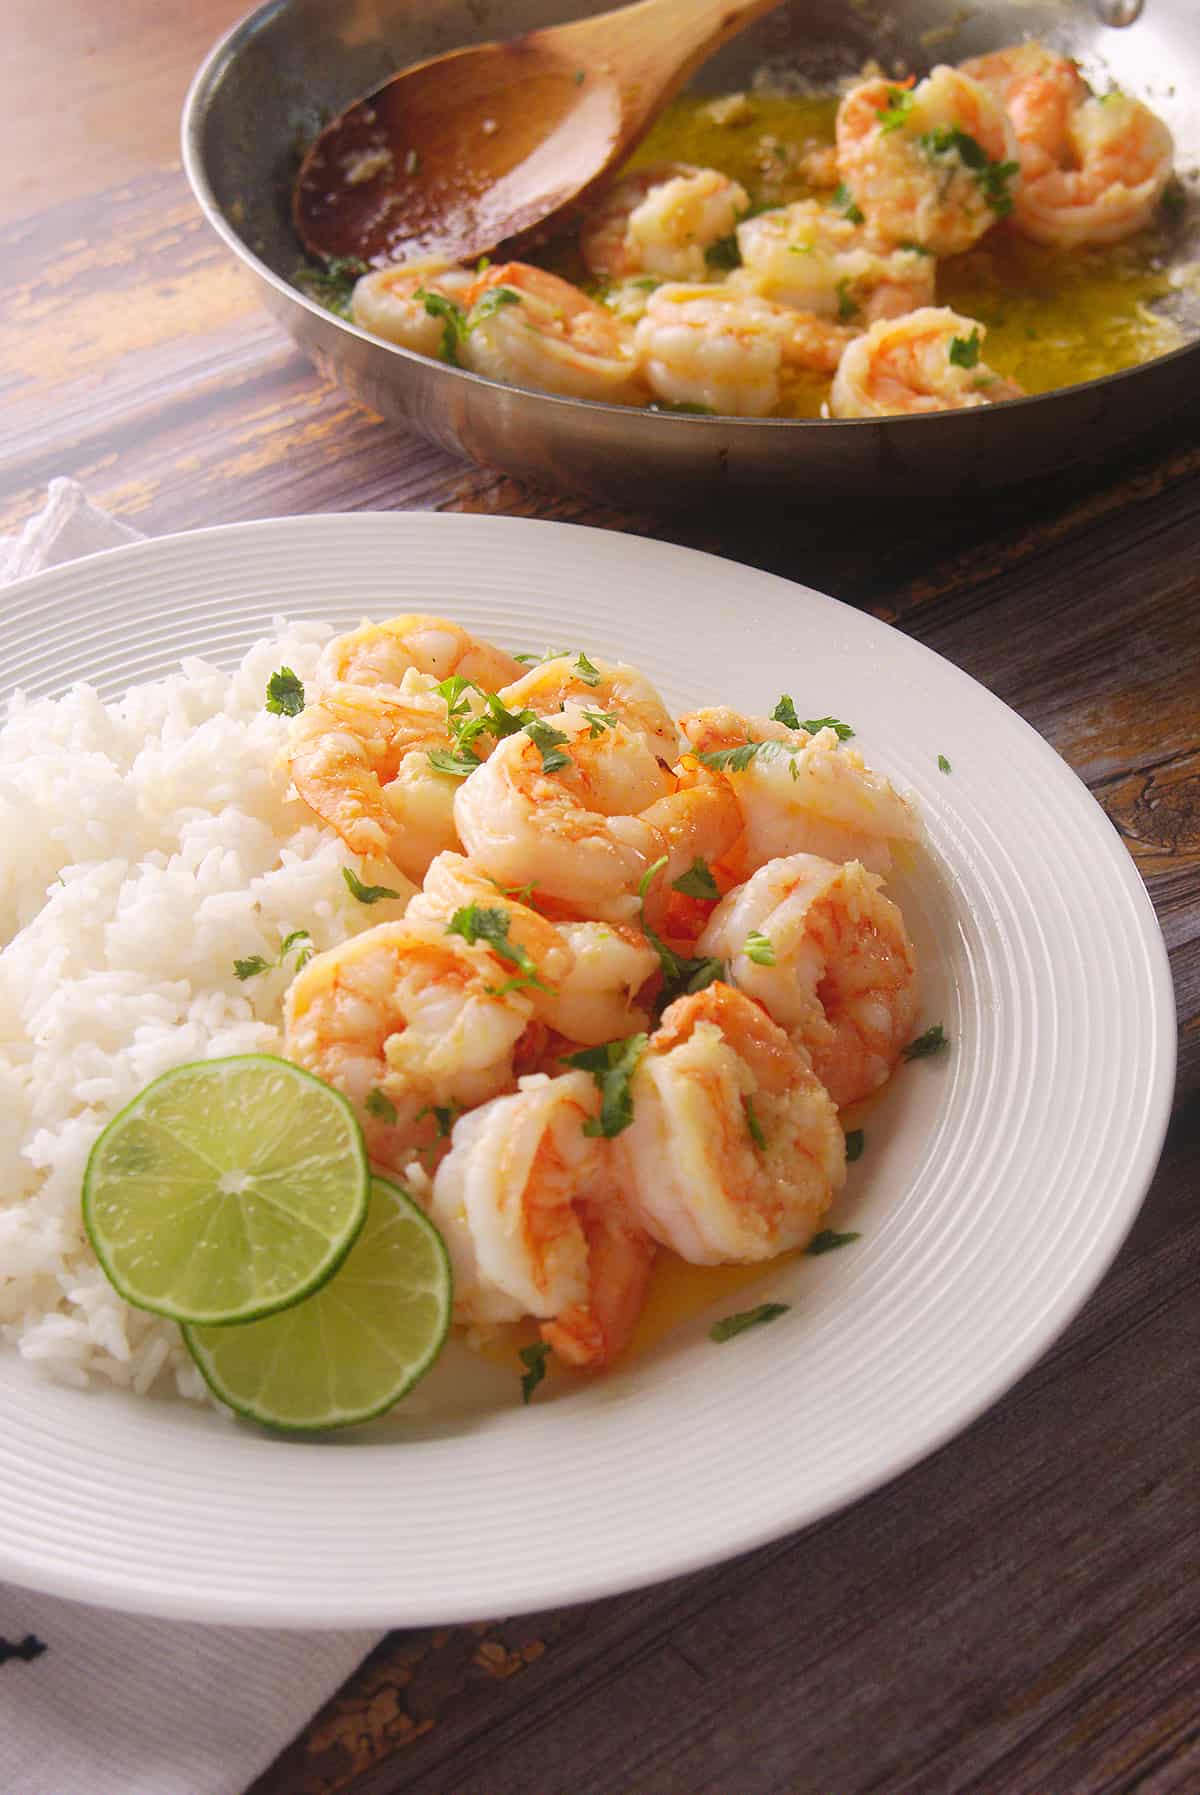 Shrimp and rice served in a glass plate with lime slices as garnish